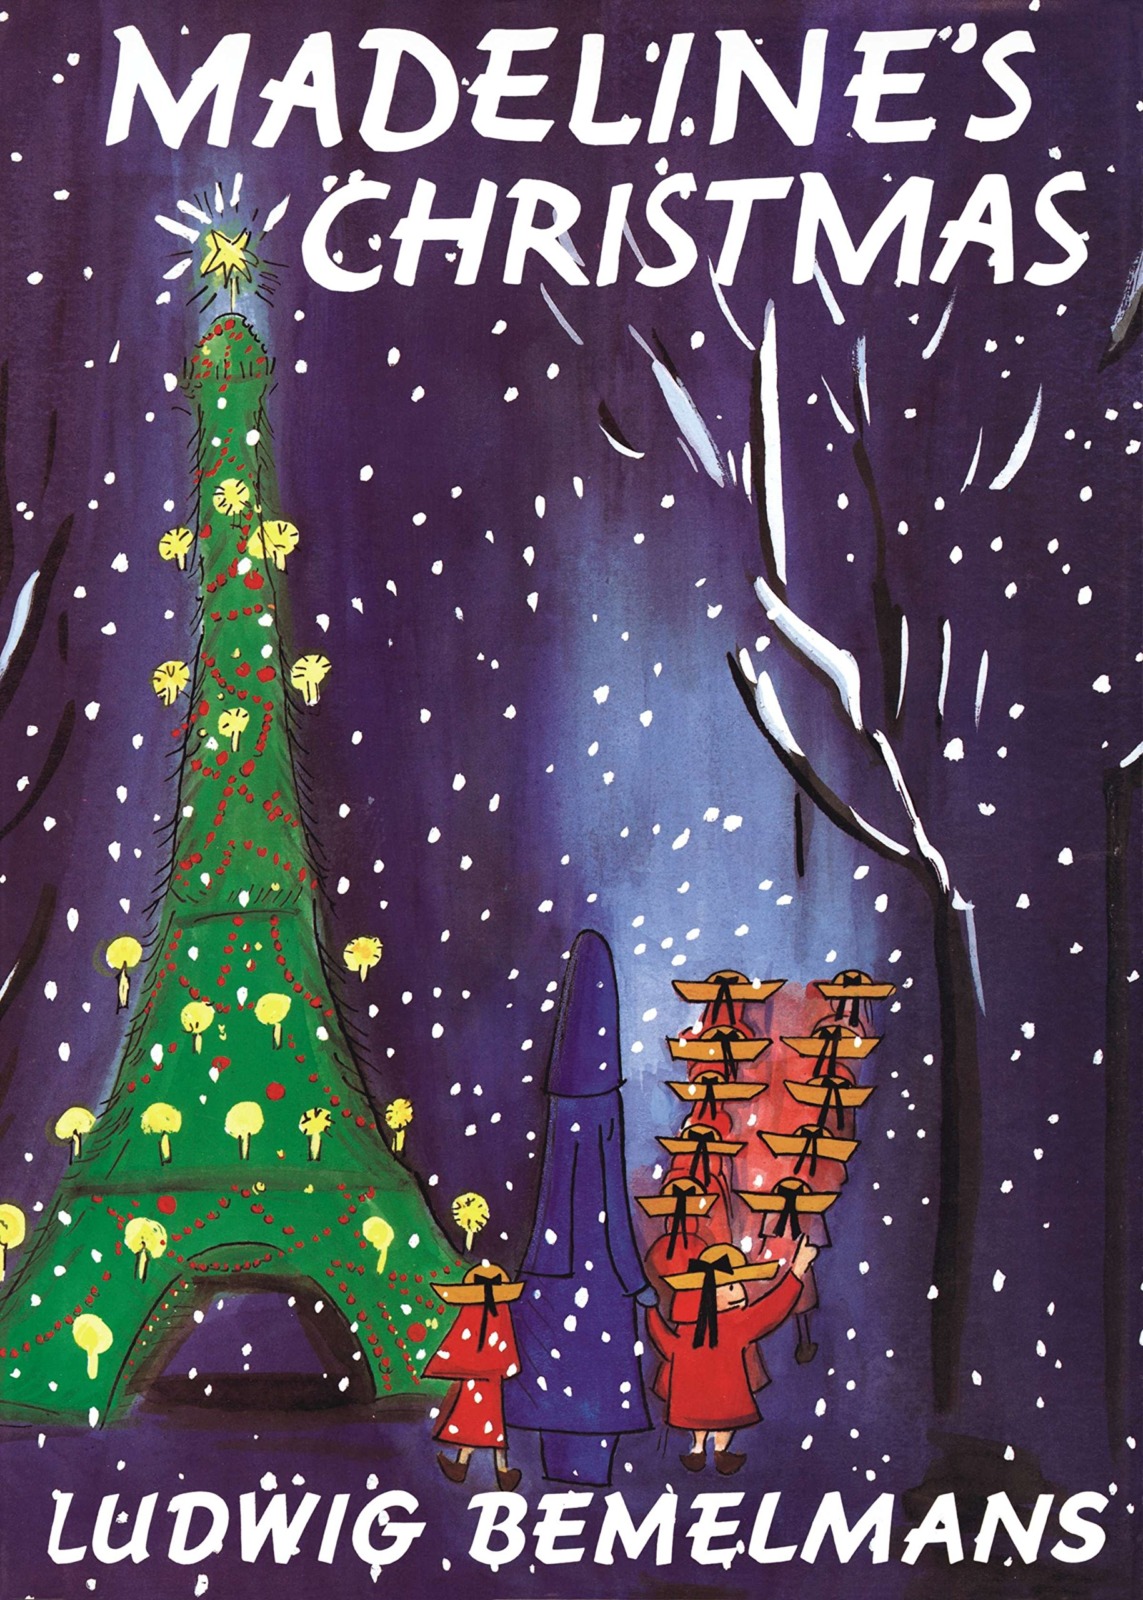 French Books Ideas - Madeline's Christmas